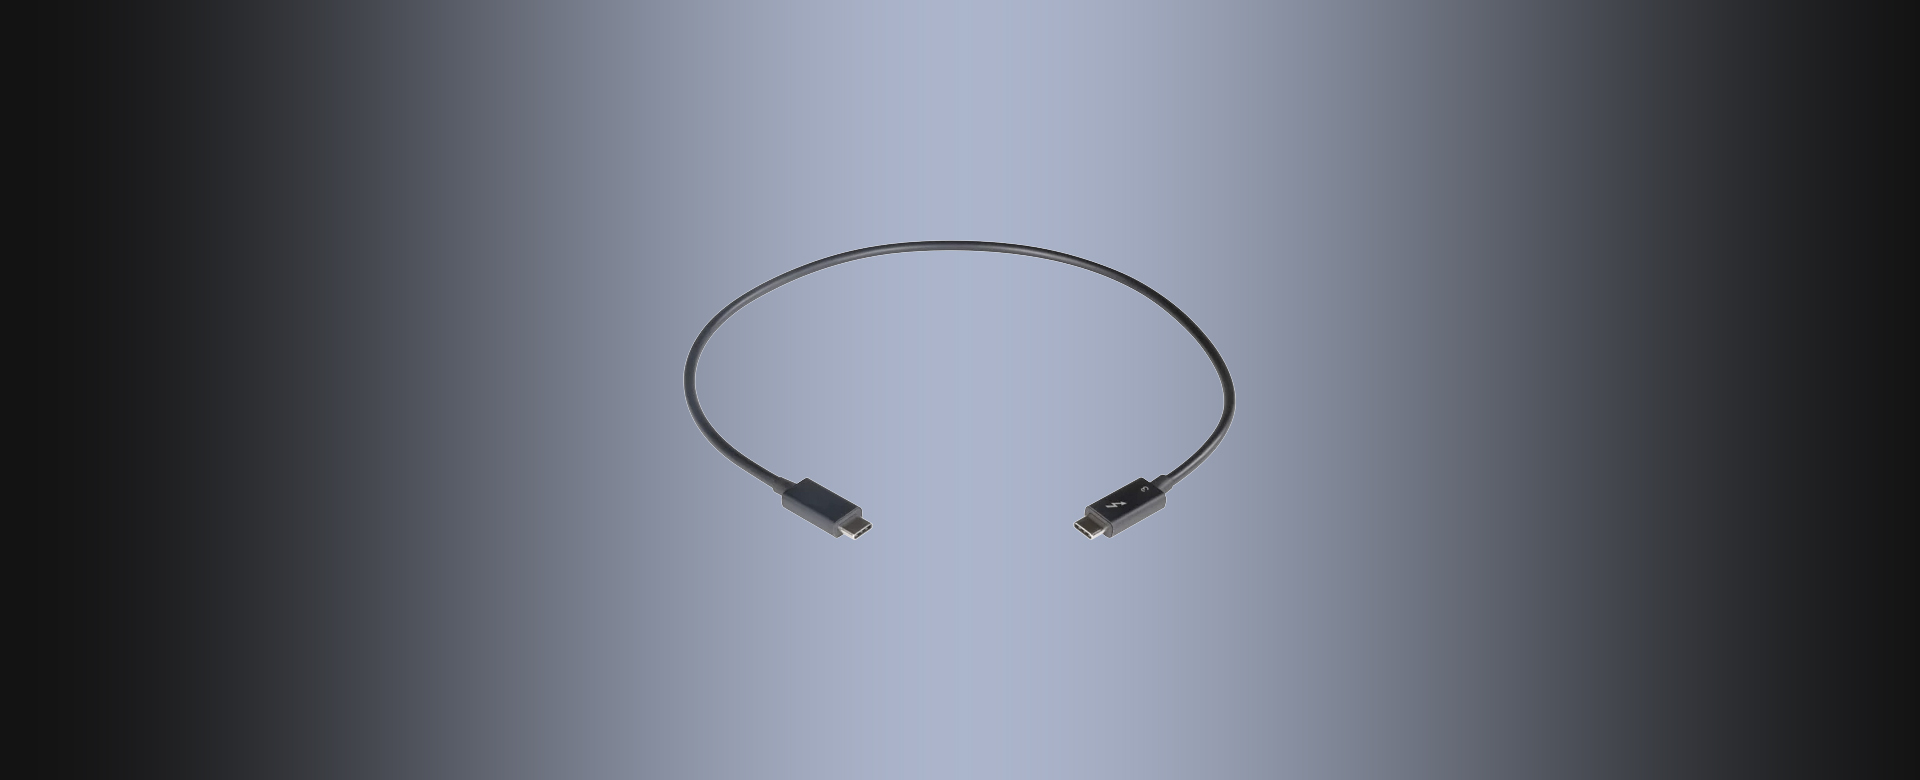 Thunderbolt 3 Cable (40Gpbs; 0.5-meter)